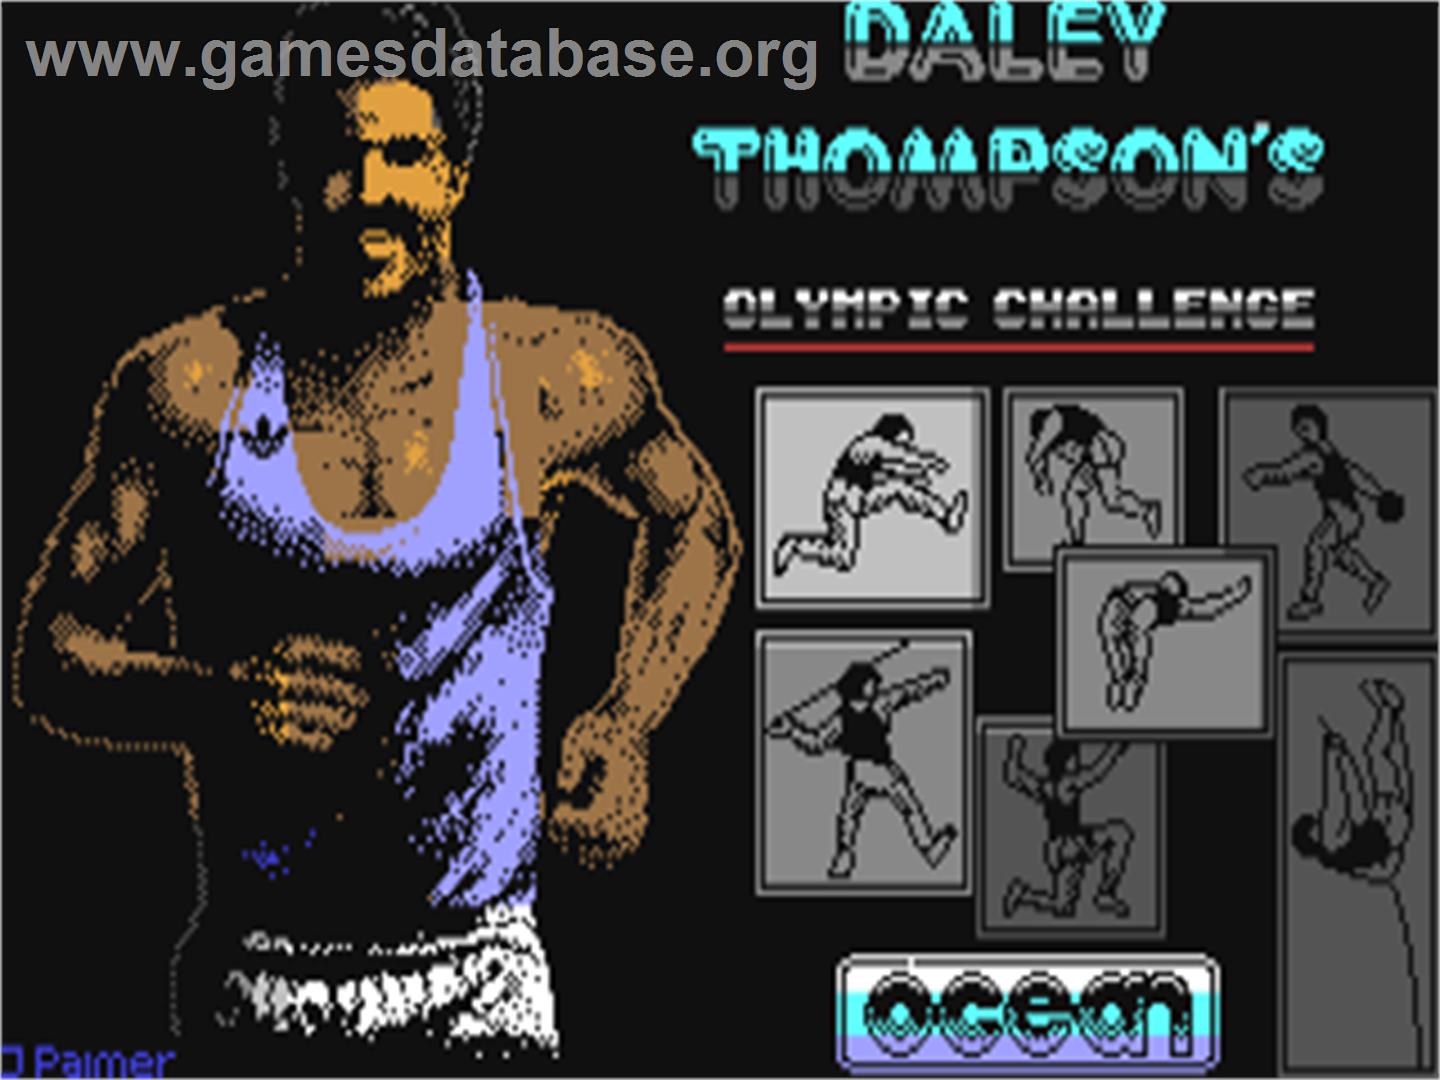 Daley Thompson's Olympic Challenge - Commodore 64 - Artwork - Title Screen